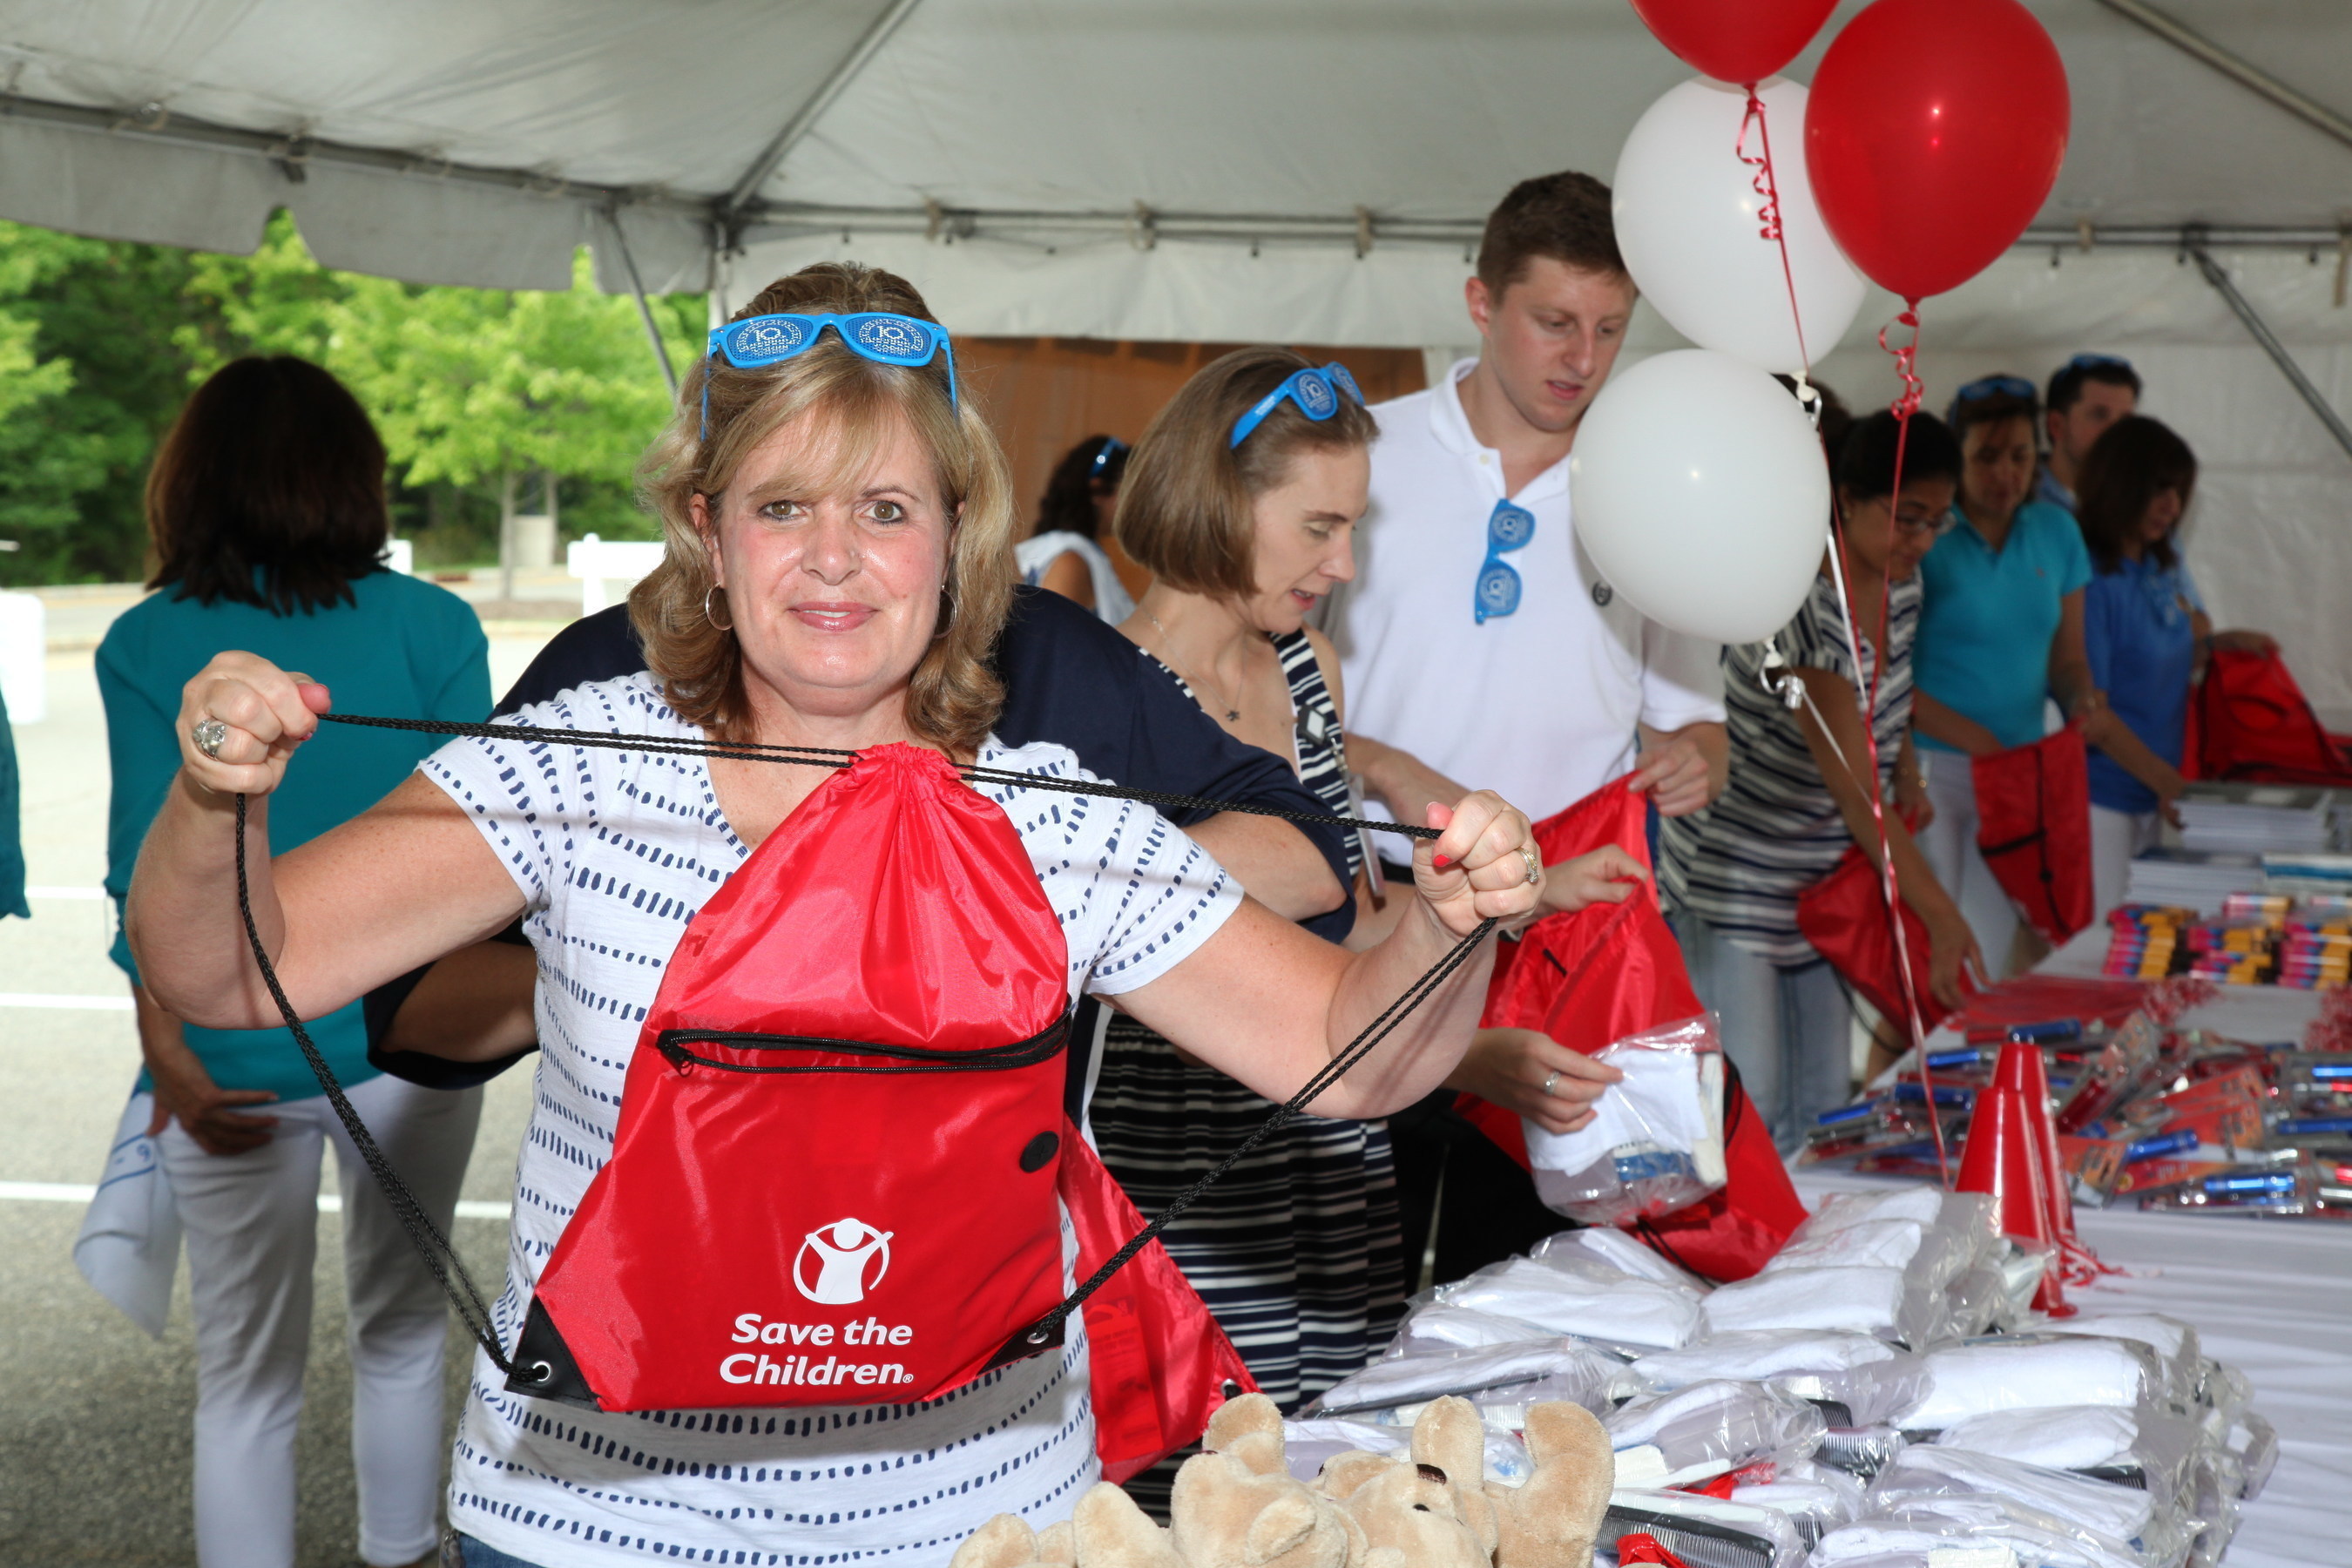 Wyndham Worldwide associates create emergency preparedness kits as part of the announcement of its global partnership with Save the Children.